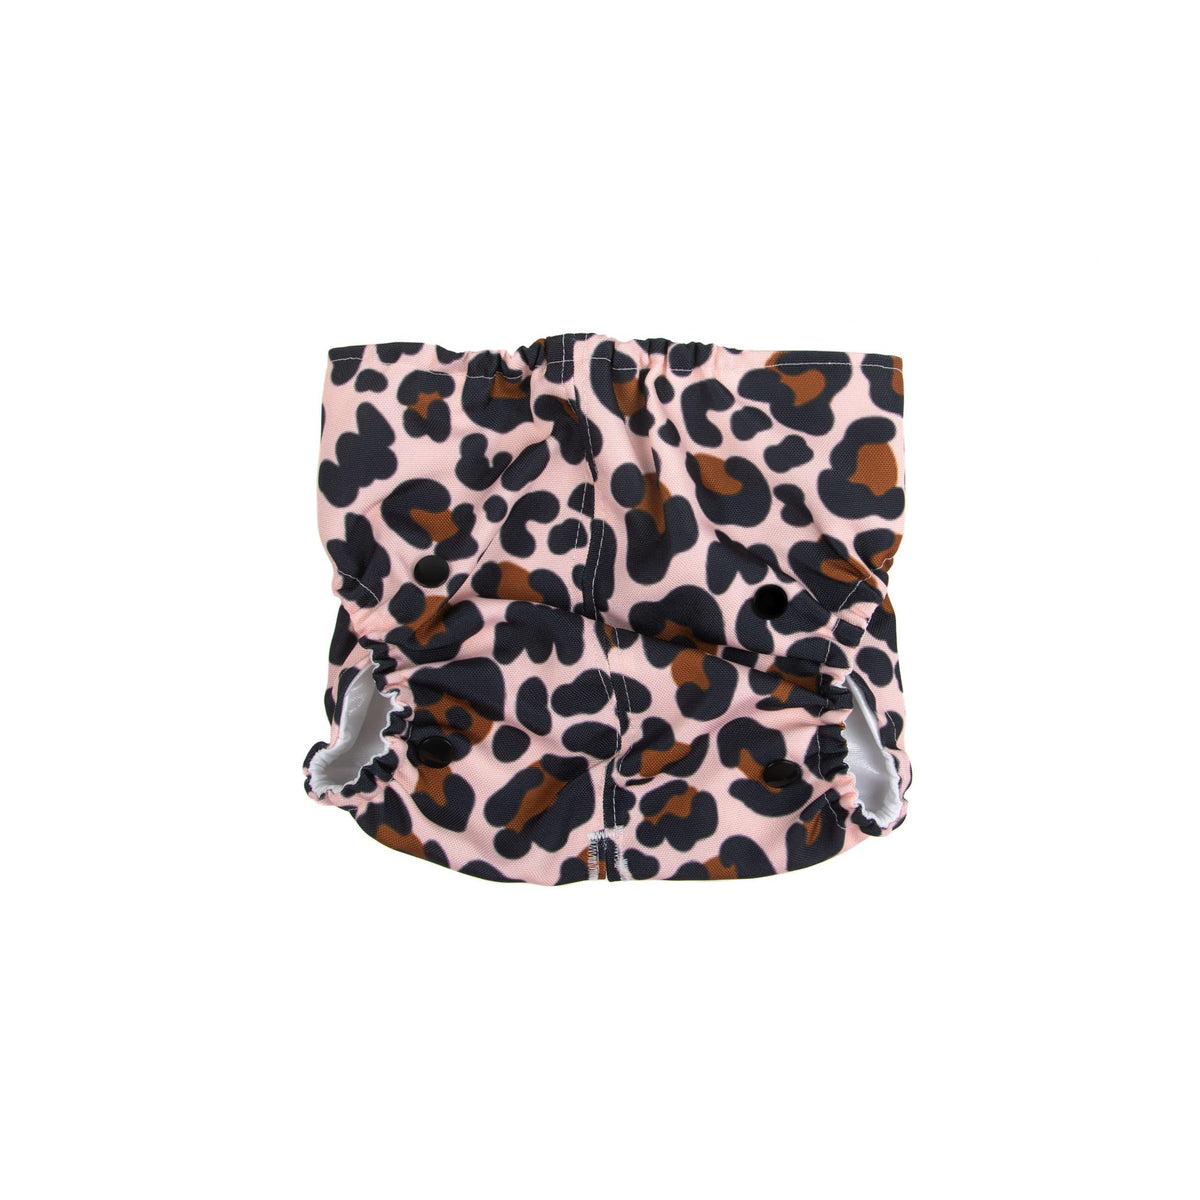 Dundies Leopard All In One Nappy (AIO)-Dundies Australia - Vet Recommended Pet Nappies